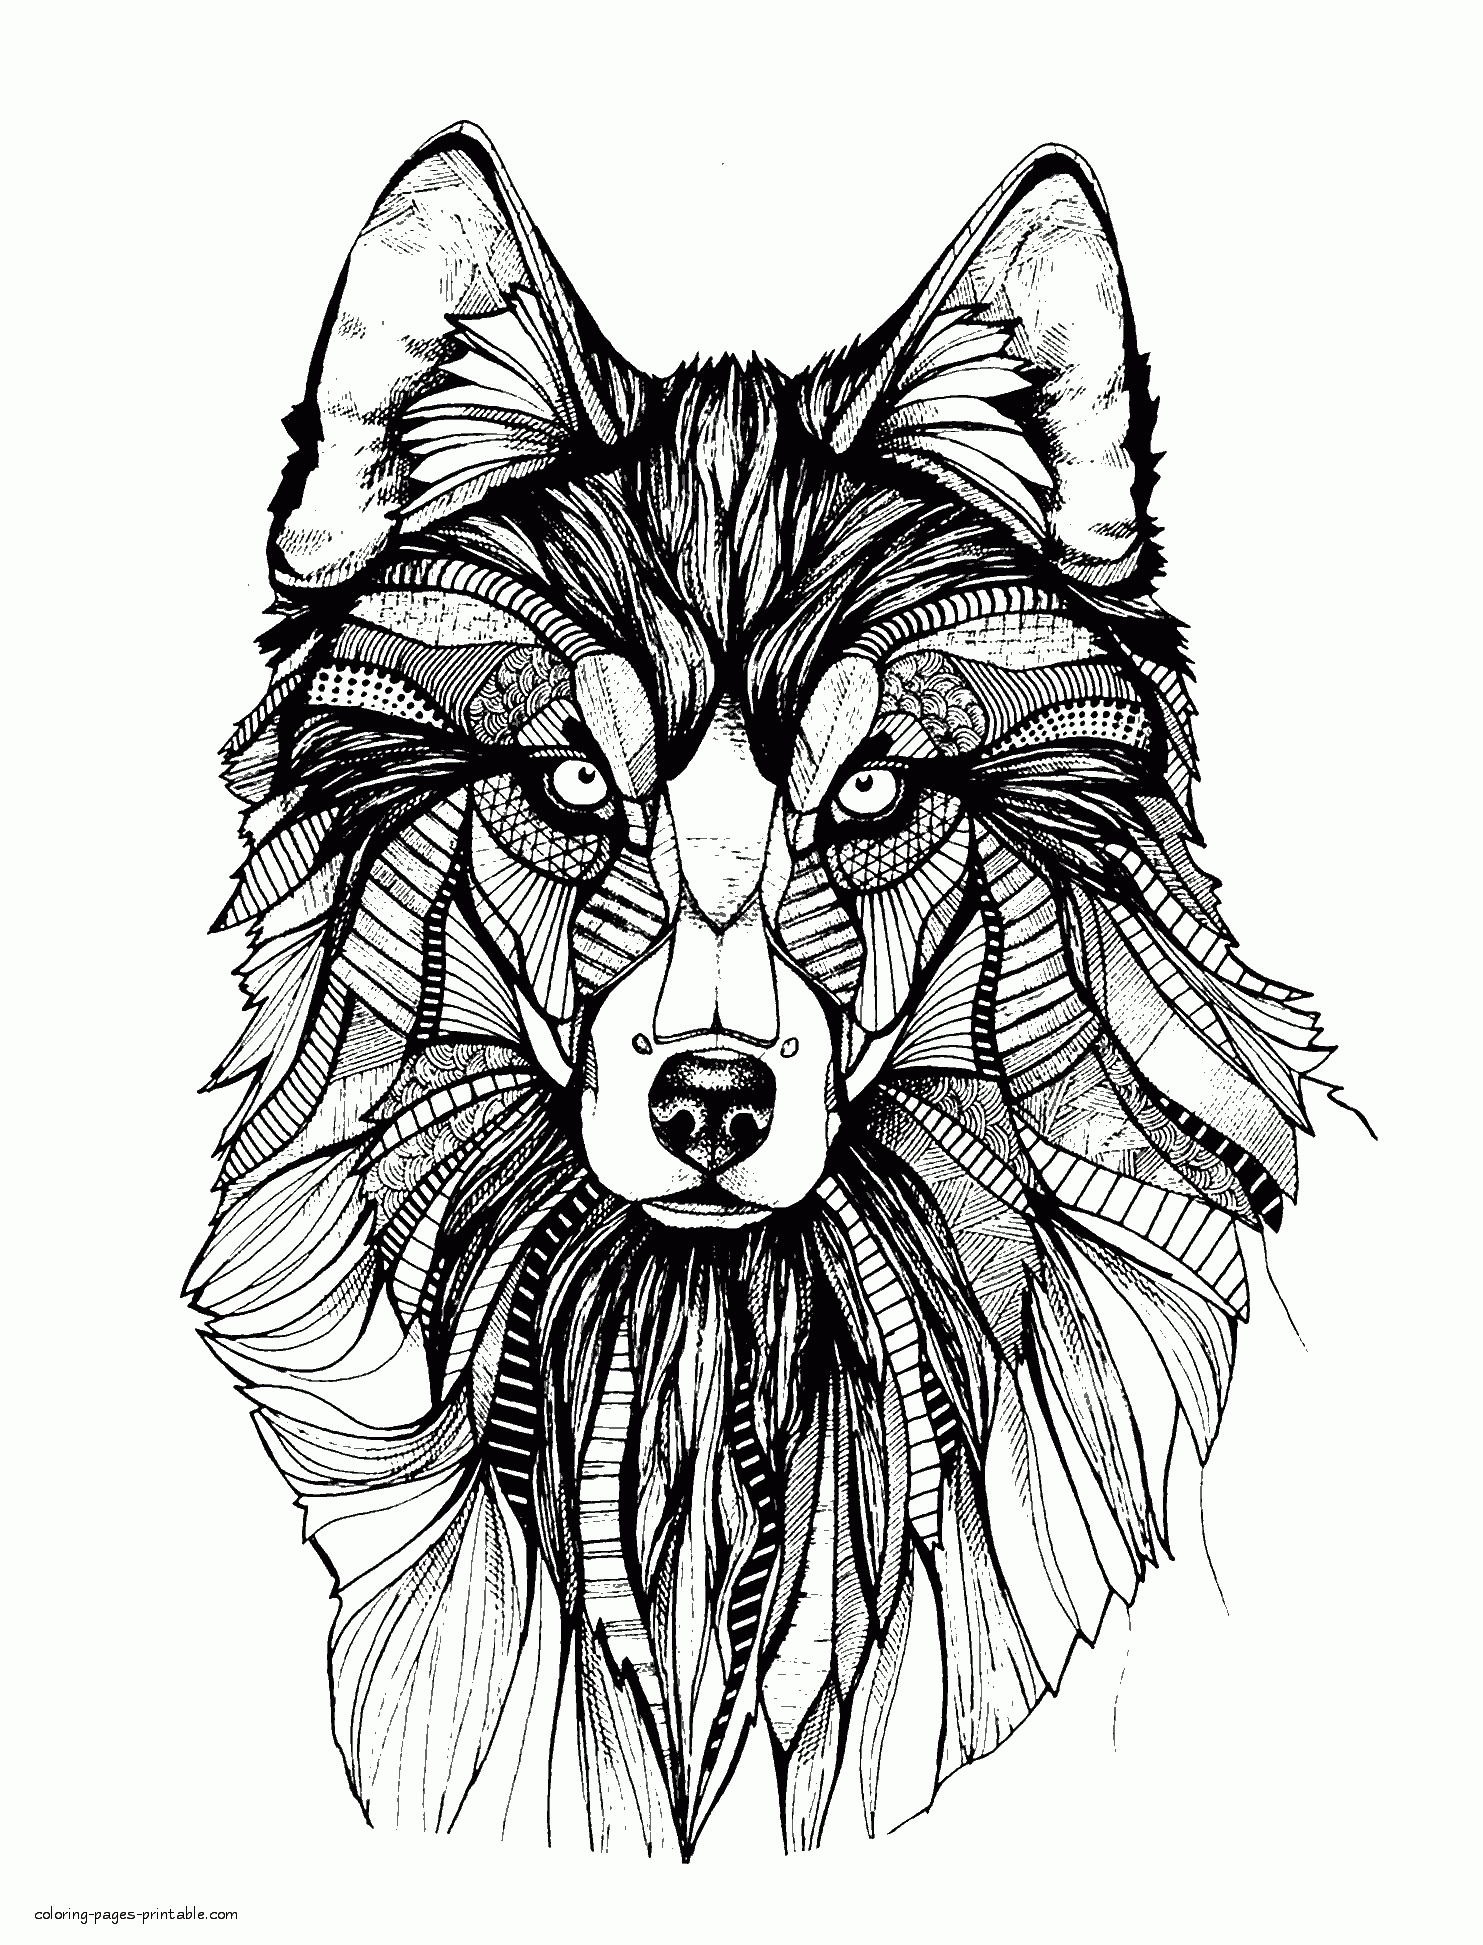 Animal Mandala Coloring Pages    COLORING PAGES PRINTABLE.COM